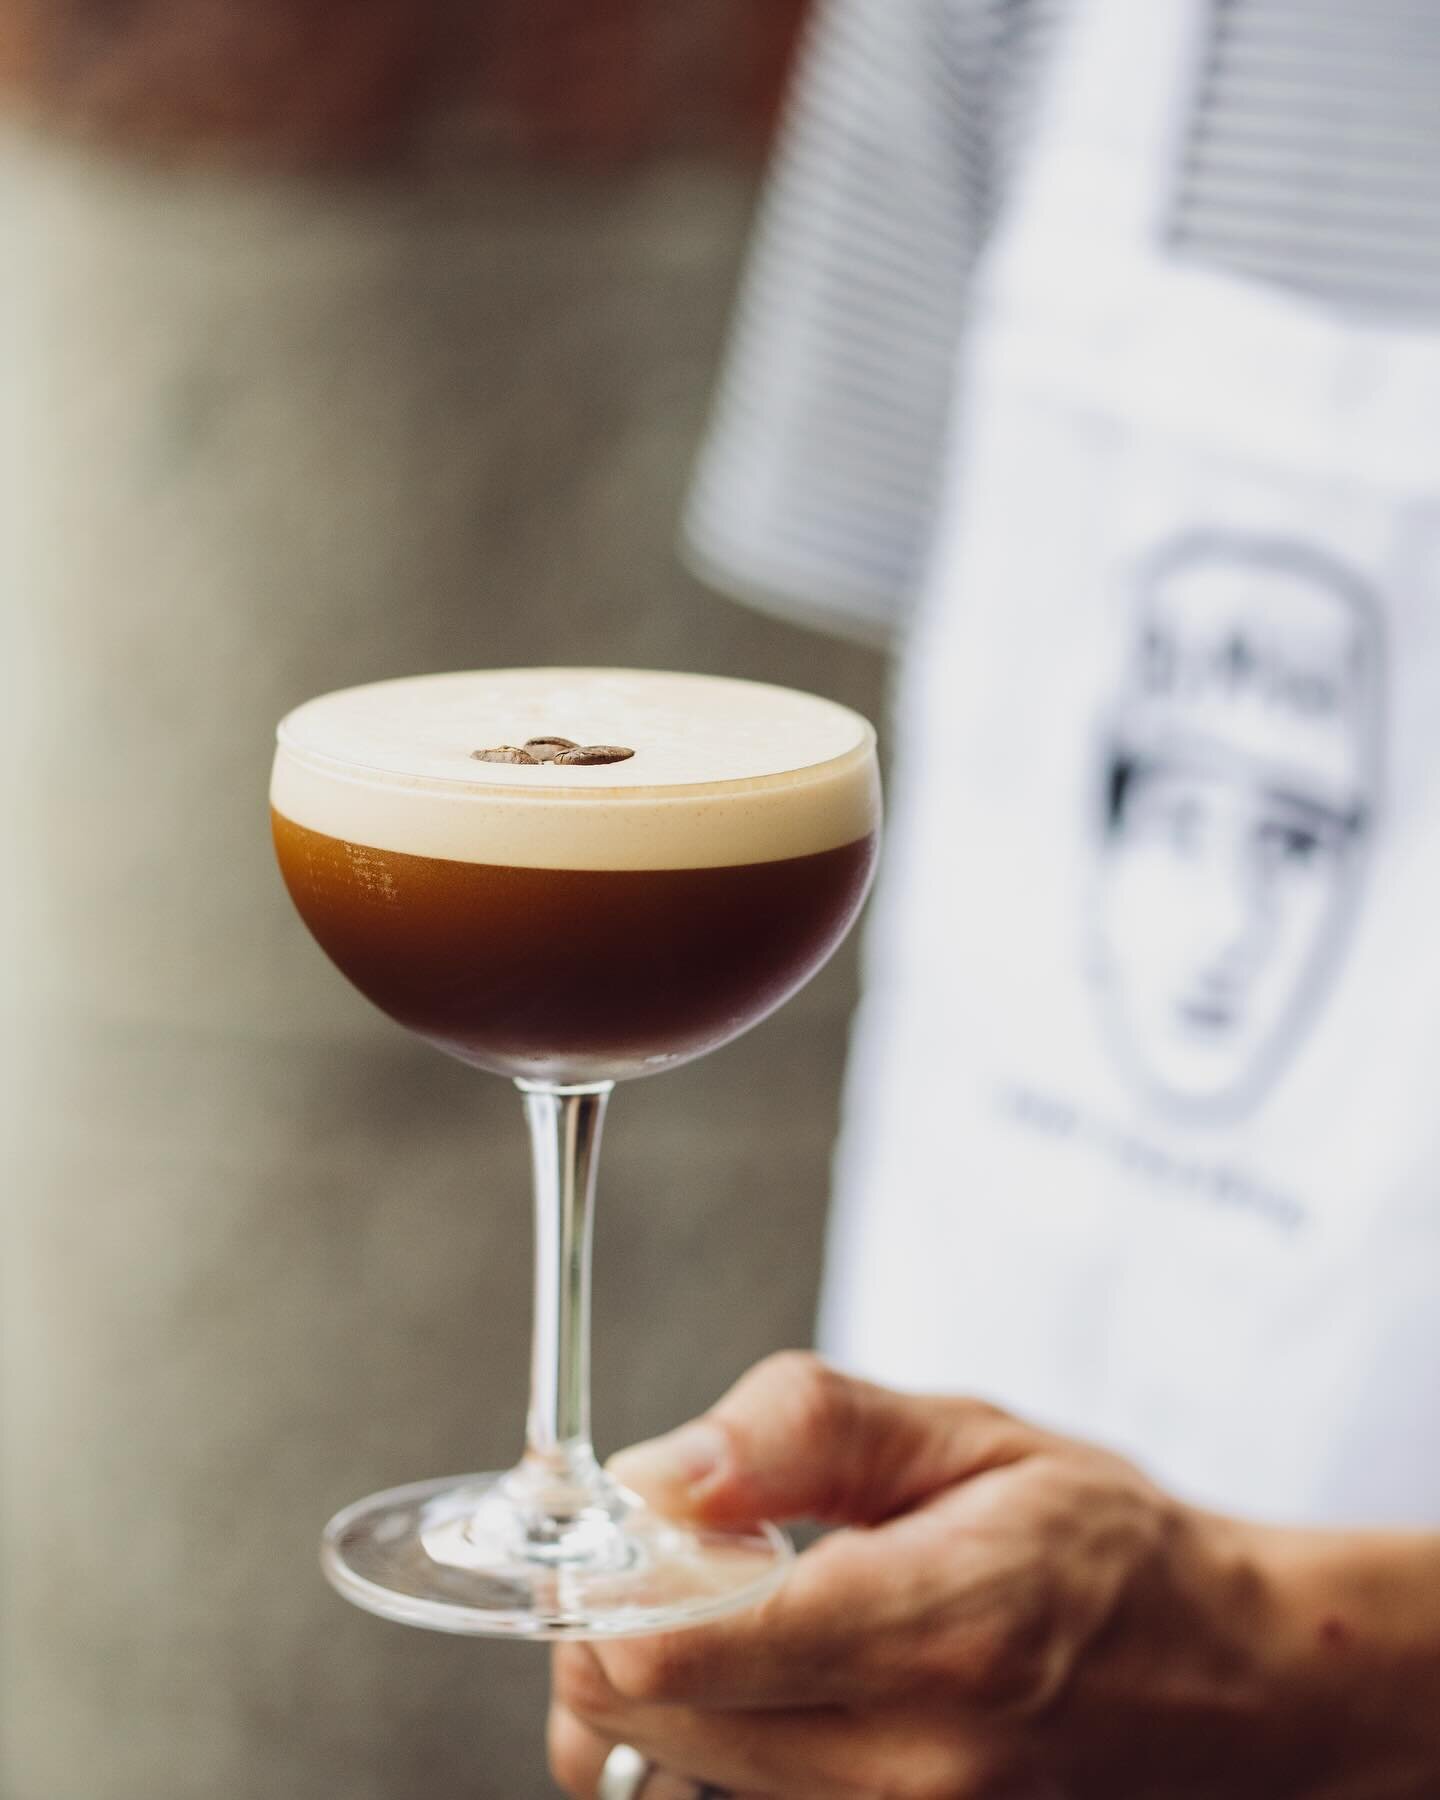 🍸 NATIONAL SPROTINI DAY ☕️

Love them or hate them, today&rsquo;s the day to celebrate the iconic Espresso Martini. 

For the festivities we&rsquo;re slinging sprotinis for &pound;7 or 2 for &pound;12 allllll day and night. 

Join us tonight for thr